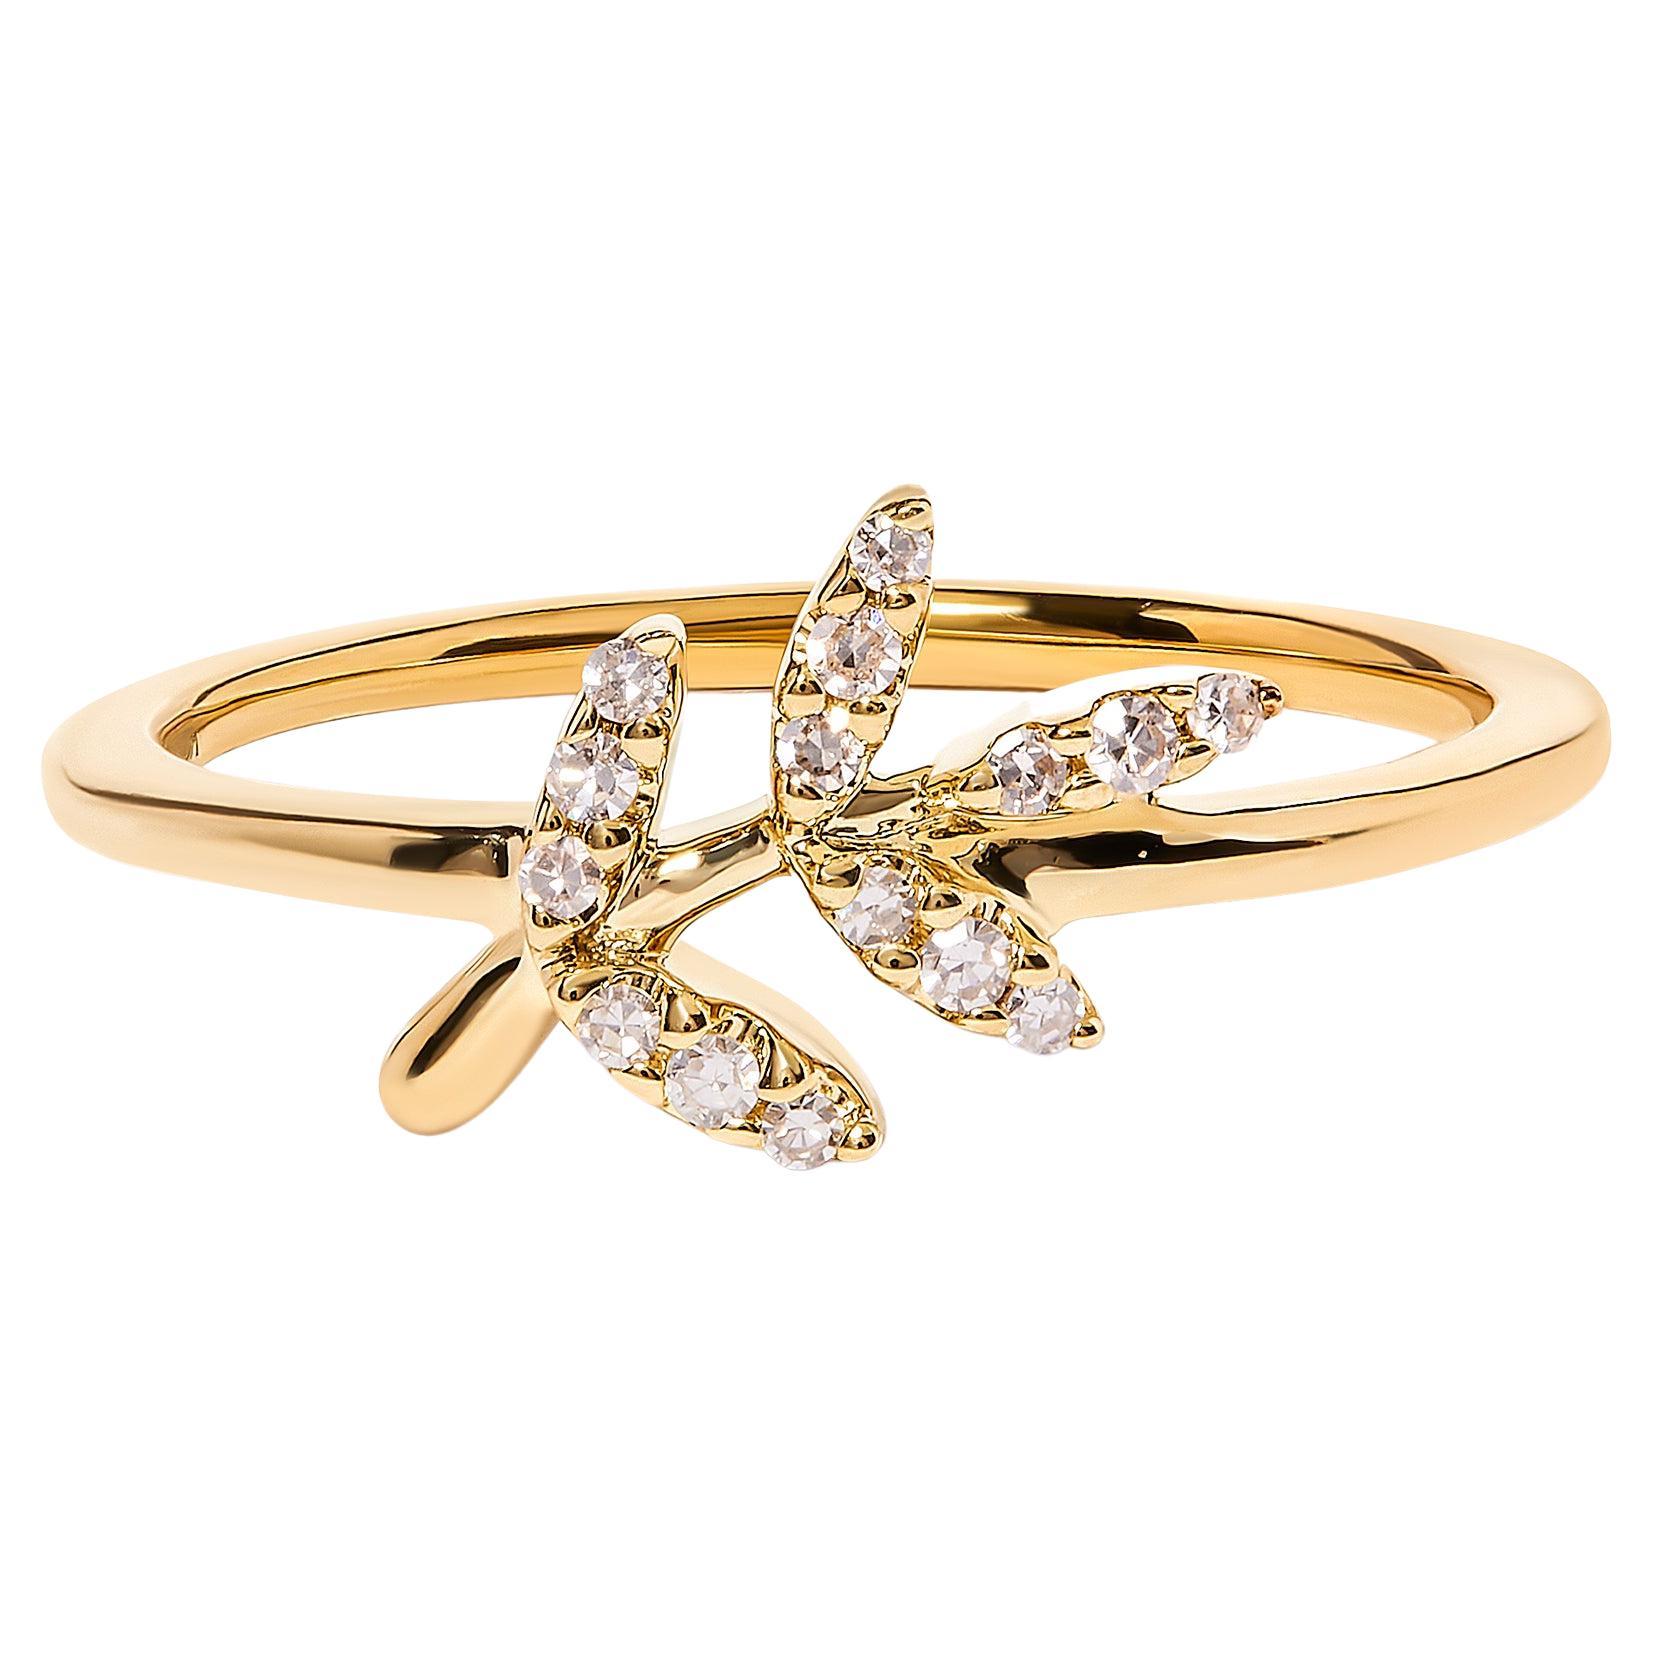 For Sale:  10K Yellow Gold 1/10 Carat Diamond Leaf and Branch Ring